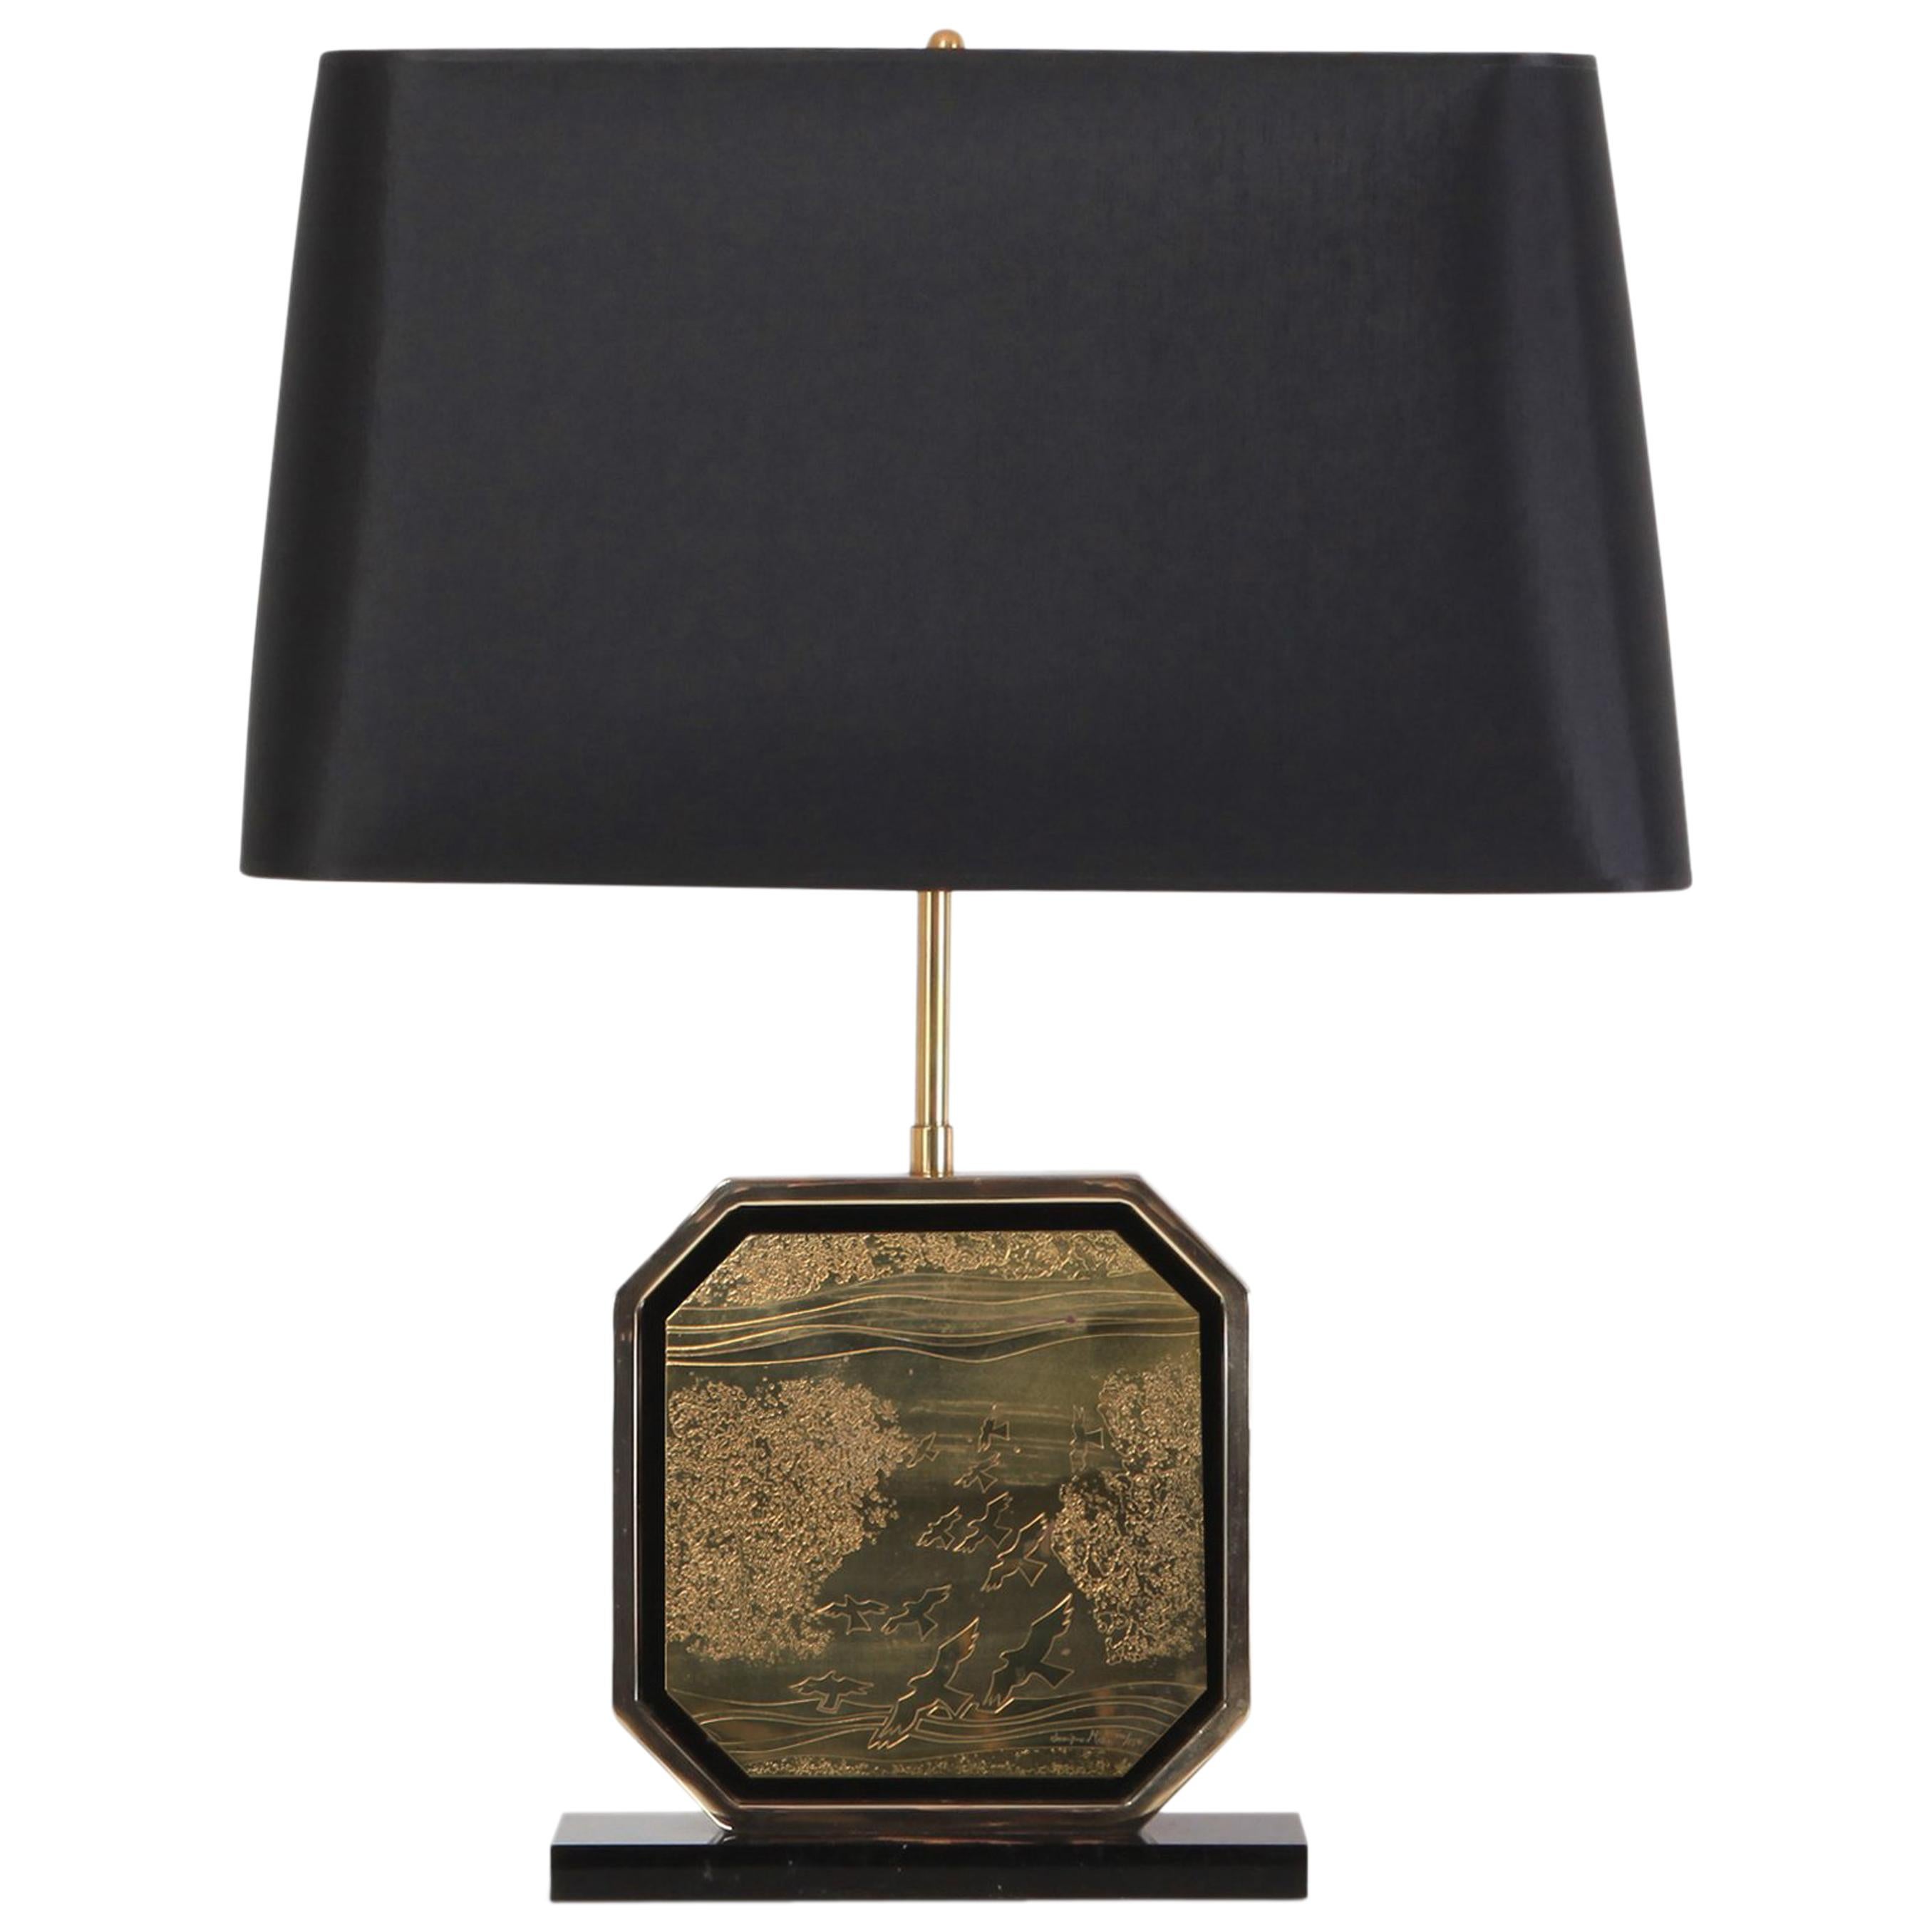 Hollywood Regency Table Lamp in 24-Karat Gold and Brass Etched Artwork by Maho